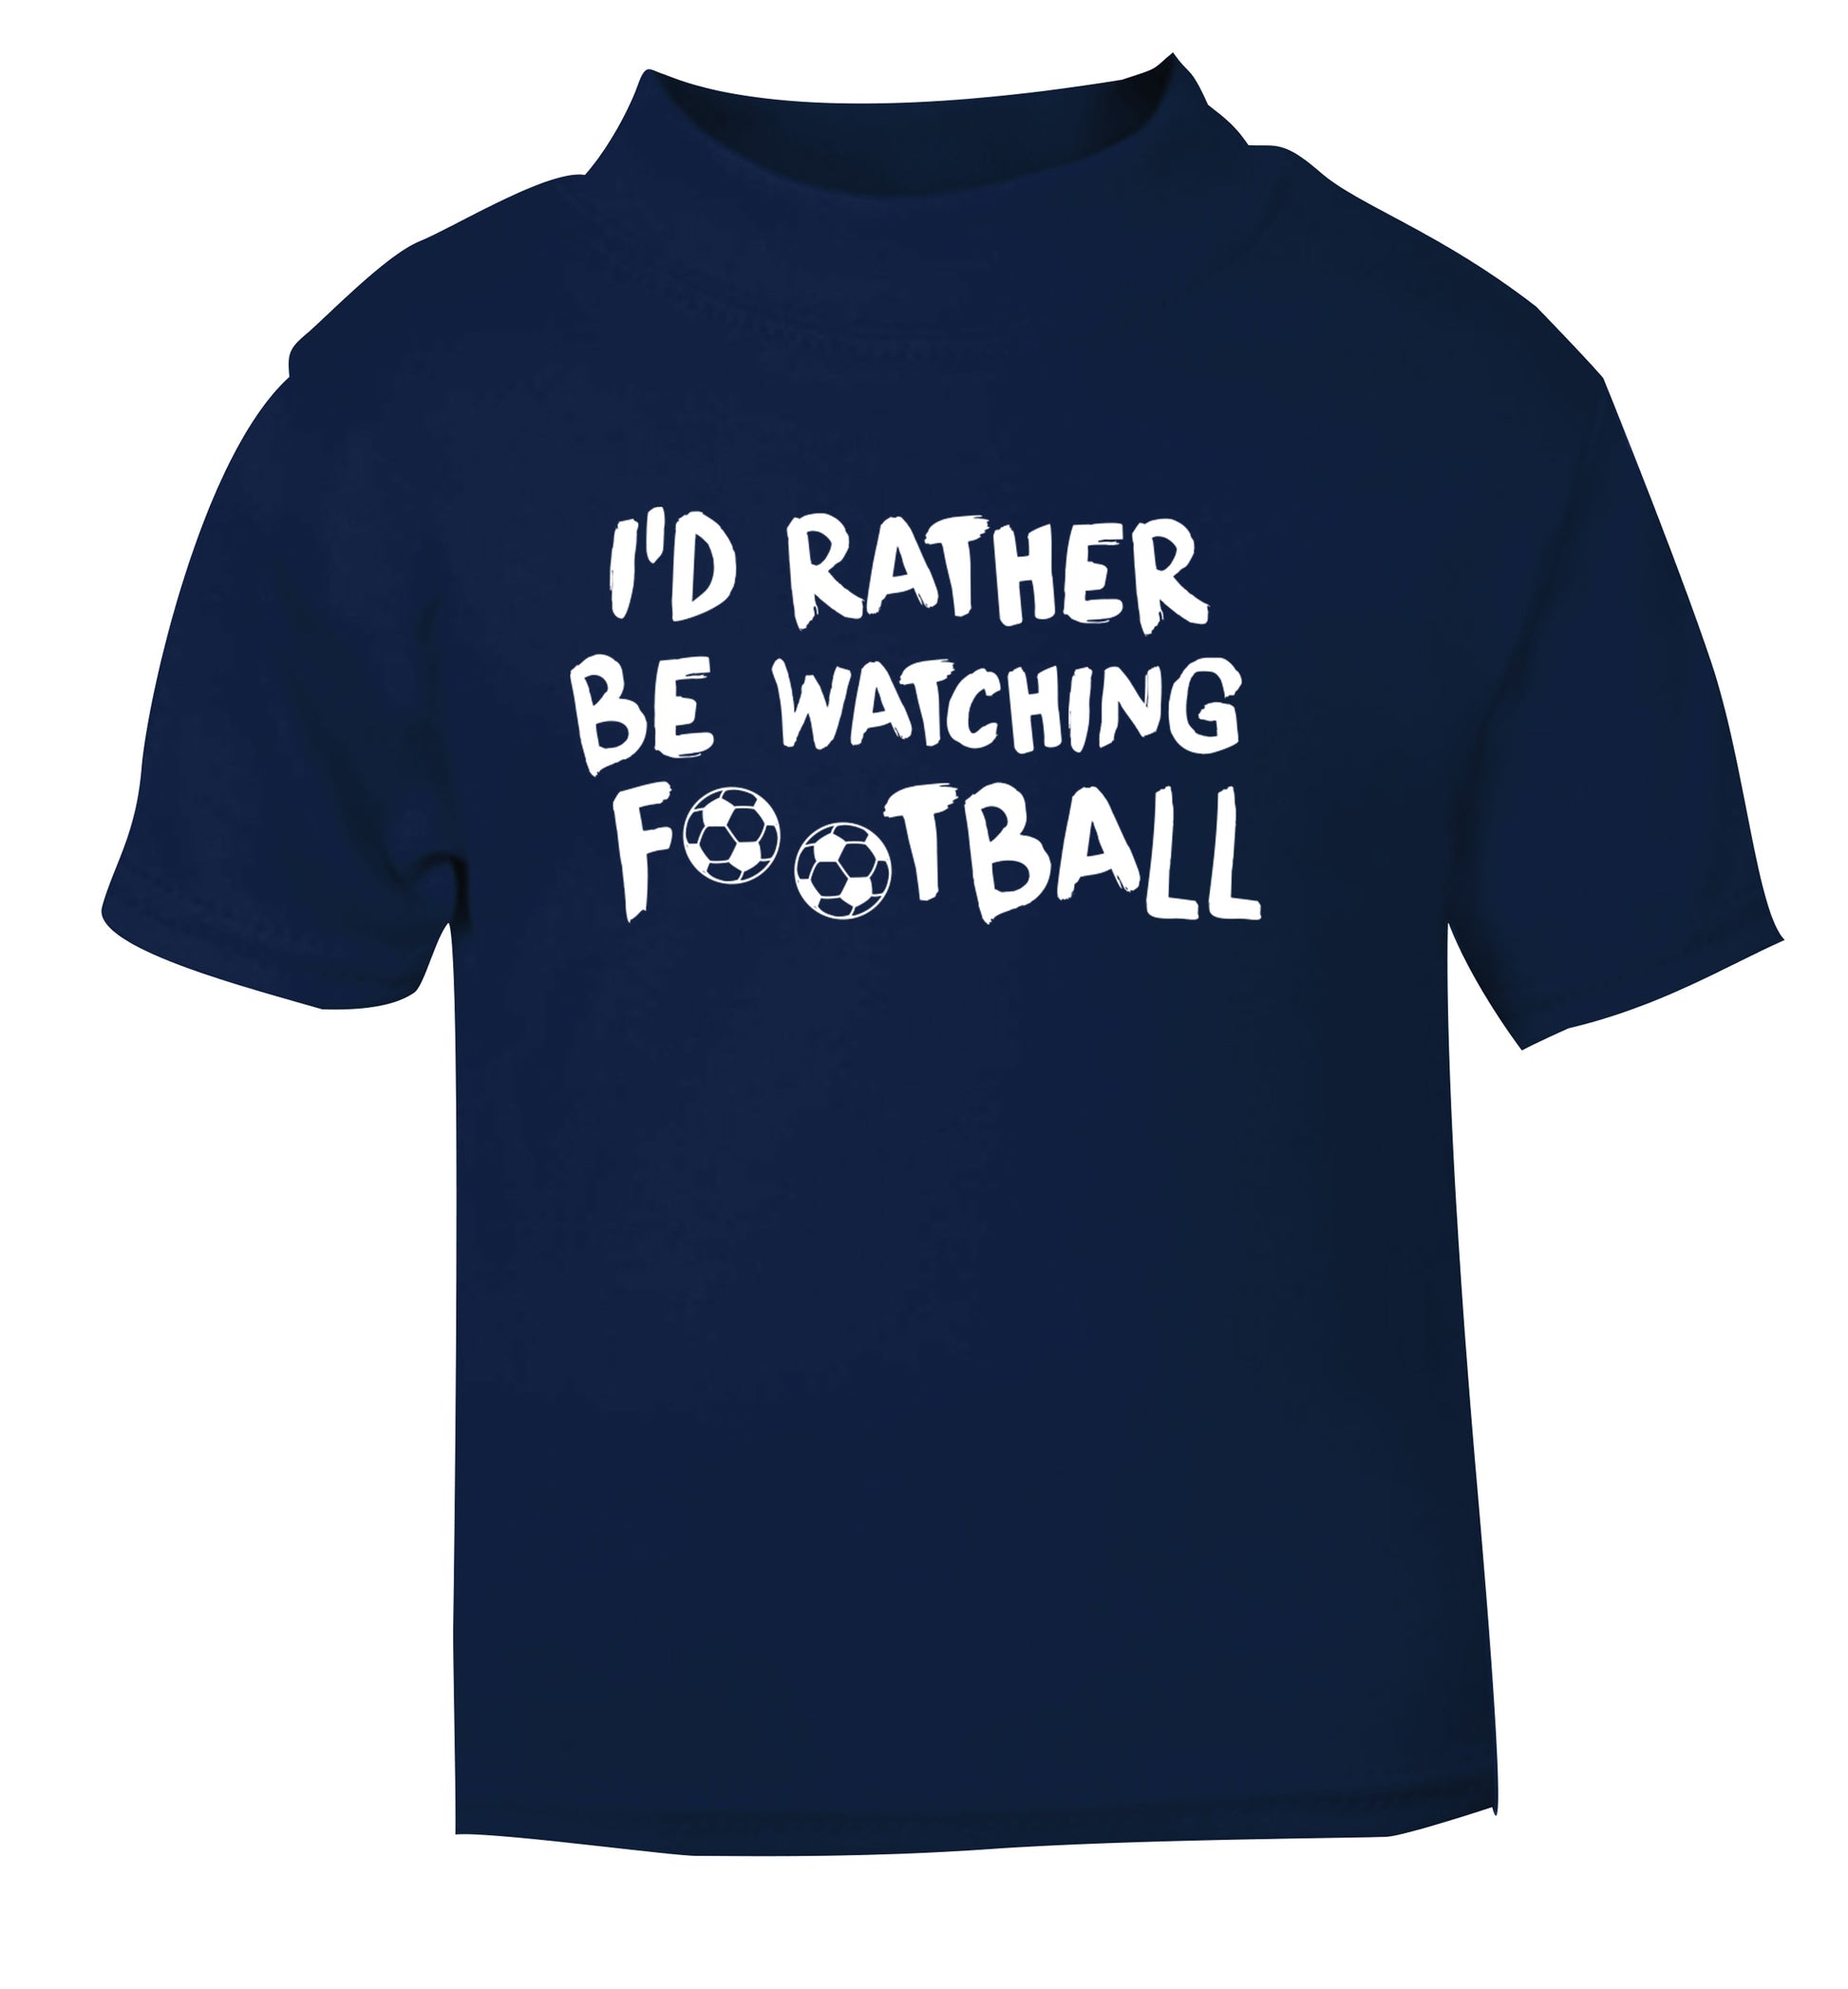 I'd rather be watching football navy Baby Toddler Tshirt 2 Years